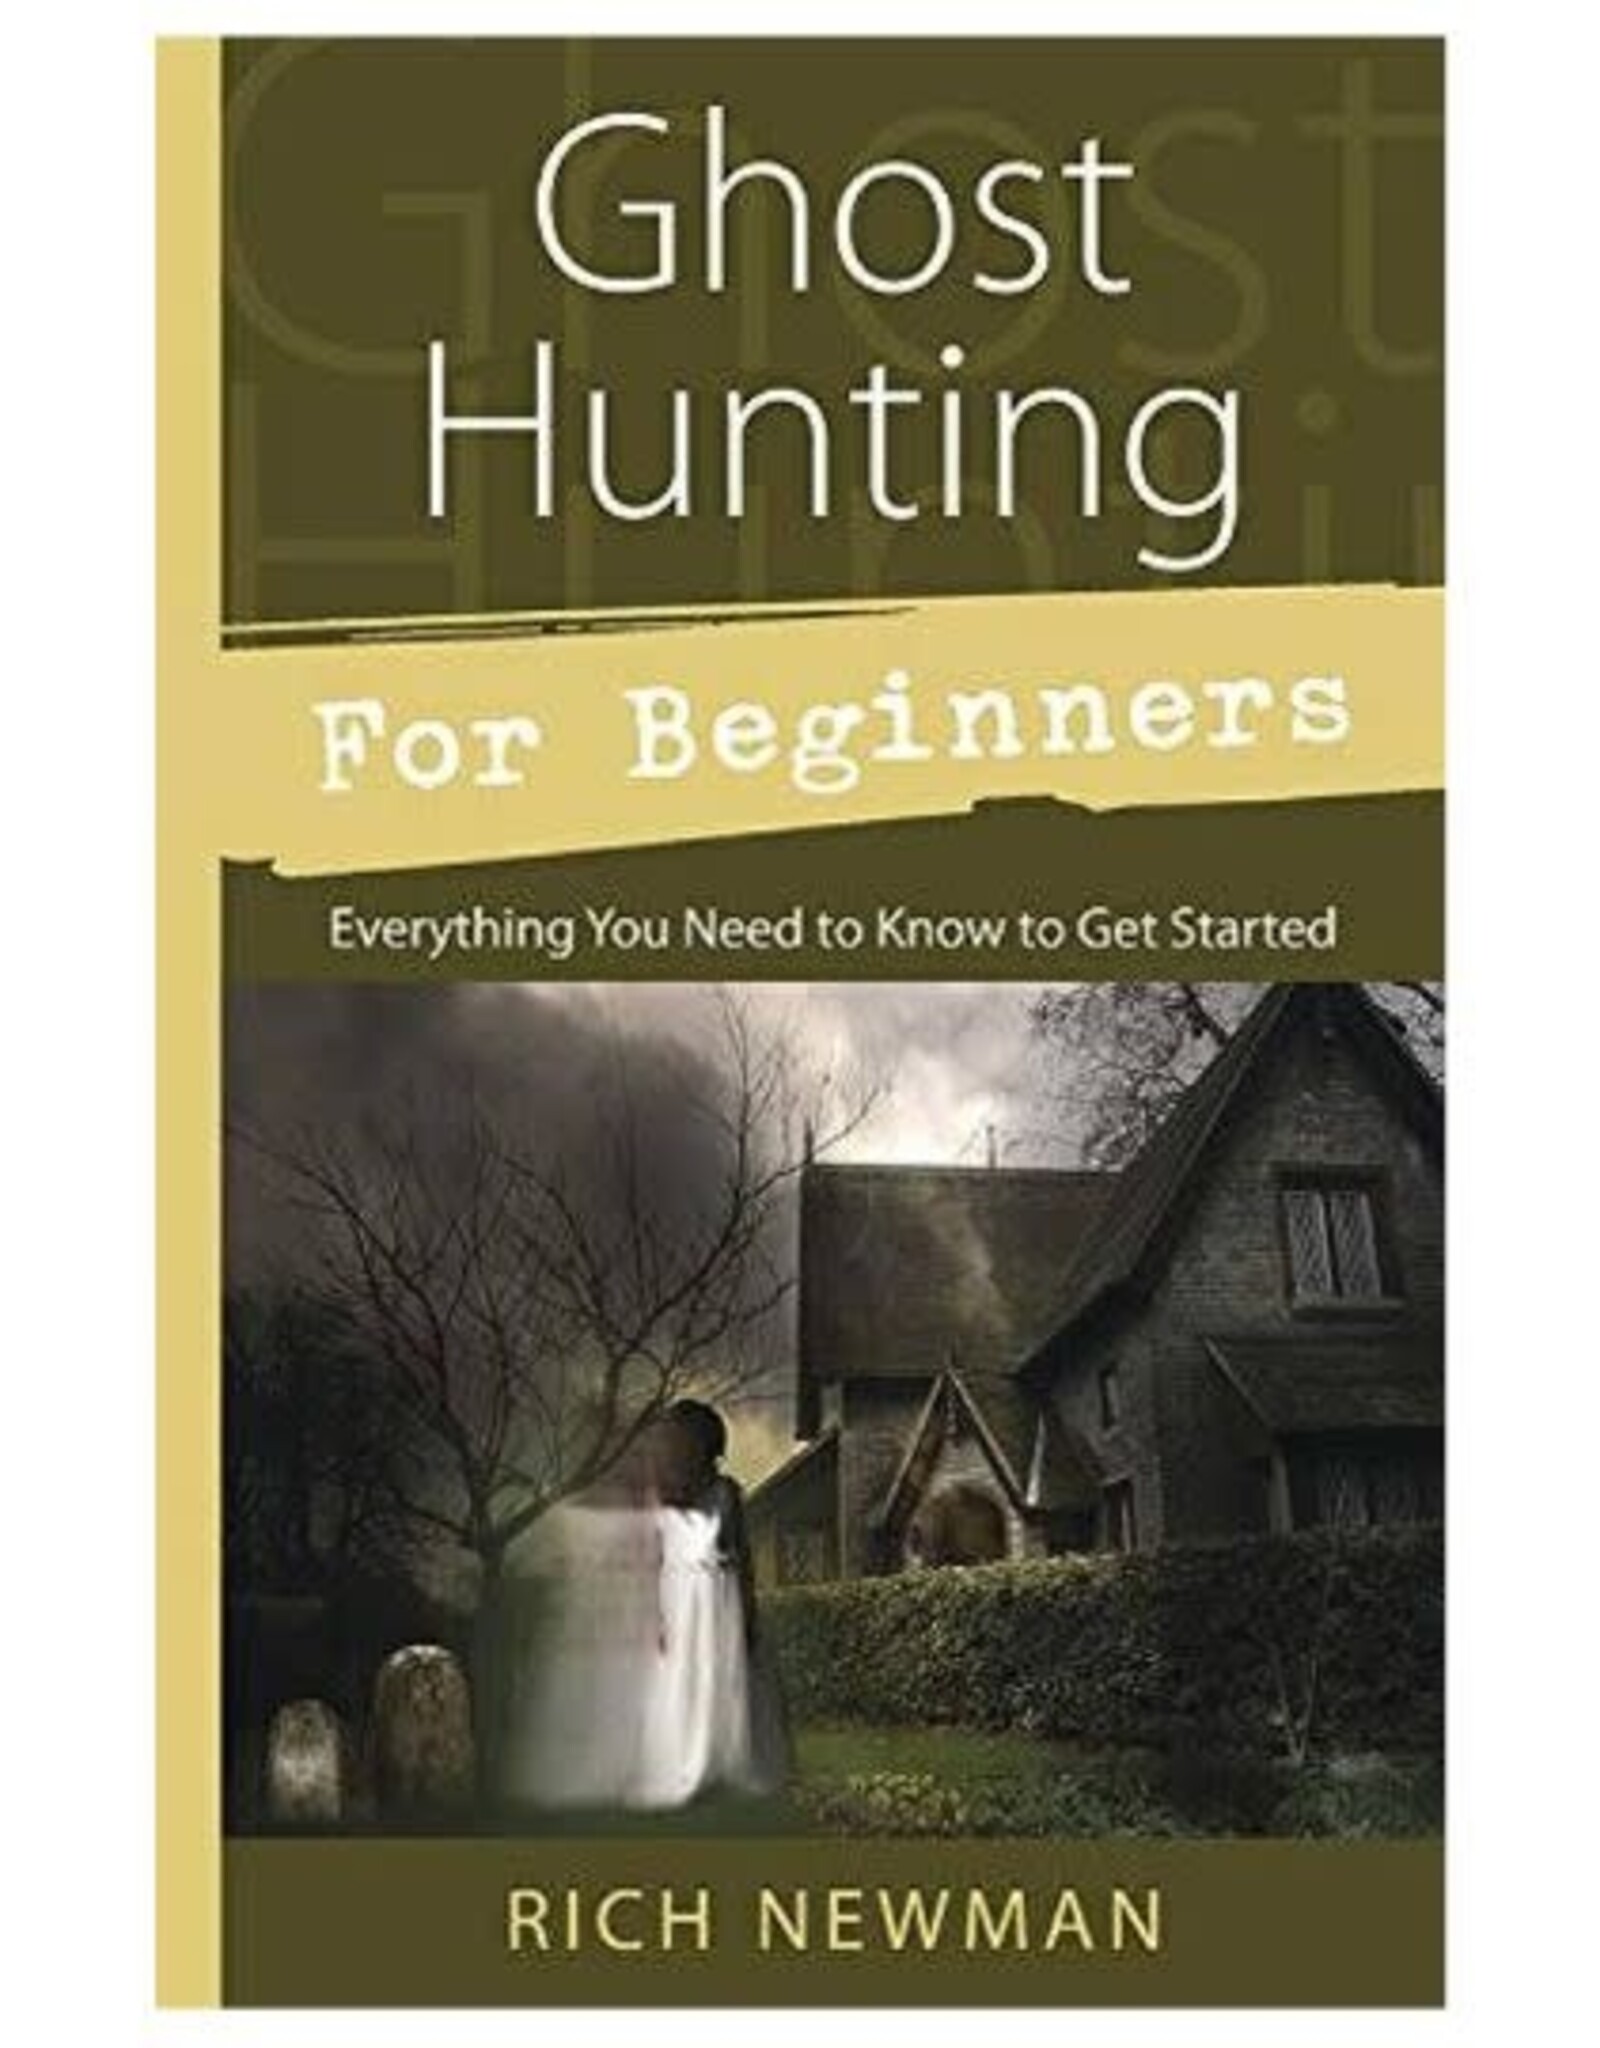 Rich Newman Ghost Hunting for Beginners by Rich Newman